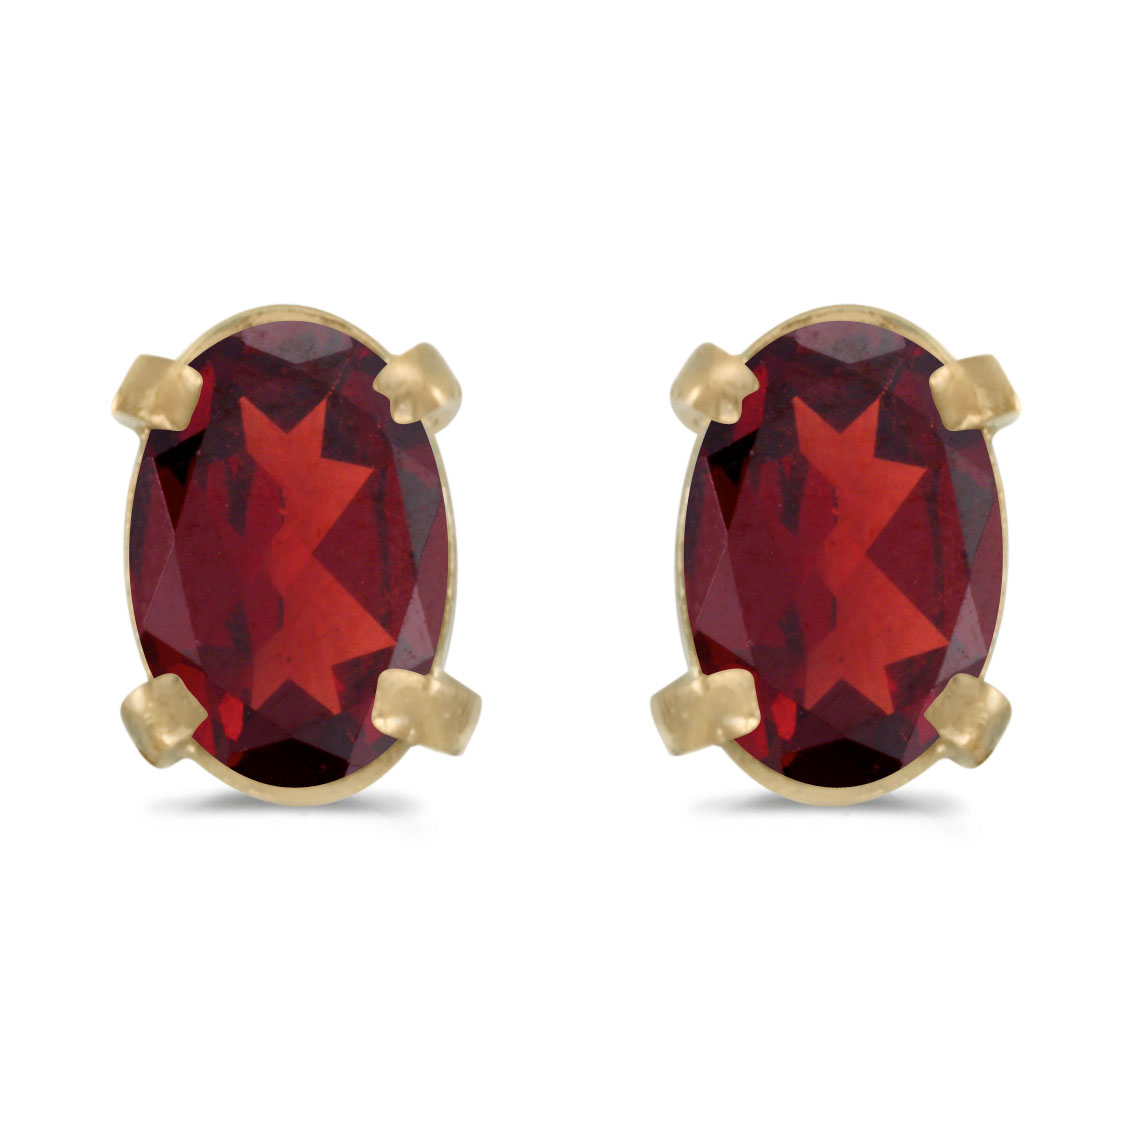 DIRECT-JEWELRY DON'T FORGET THE DASH 14k Yellow Gold Oval Garnet Earrings